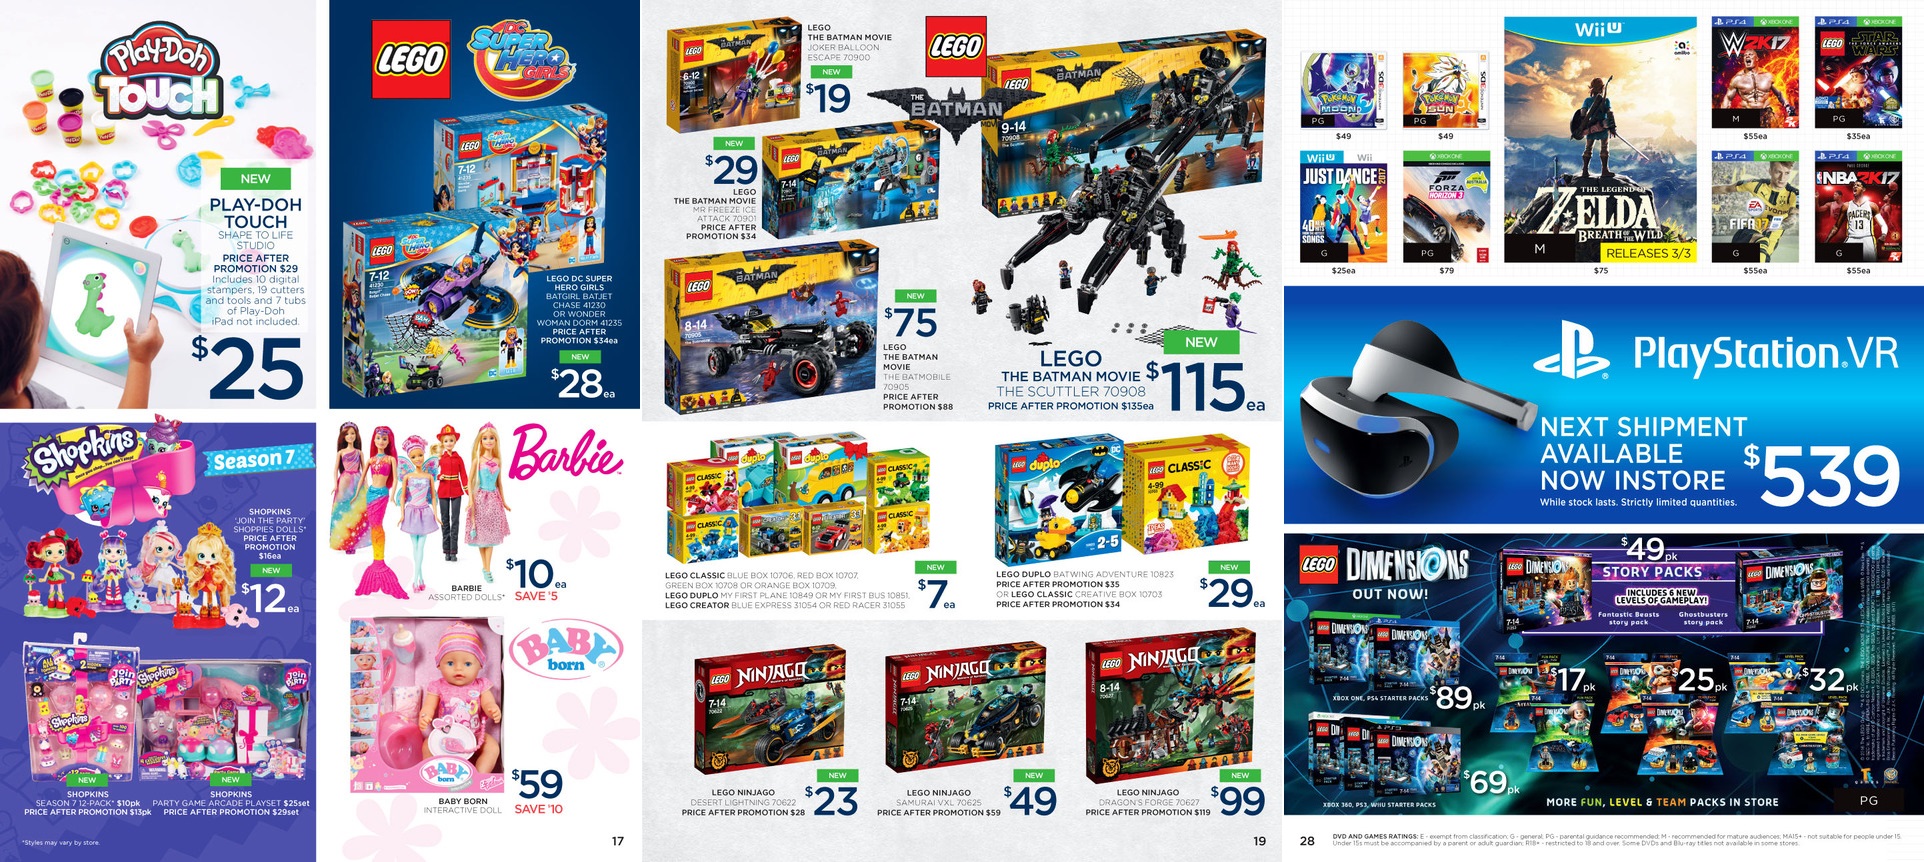 Australia has some terrific LEGO sales with additional